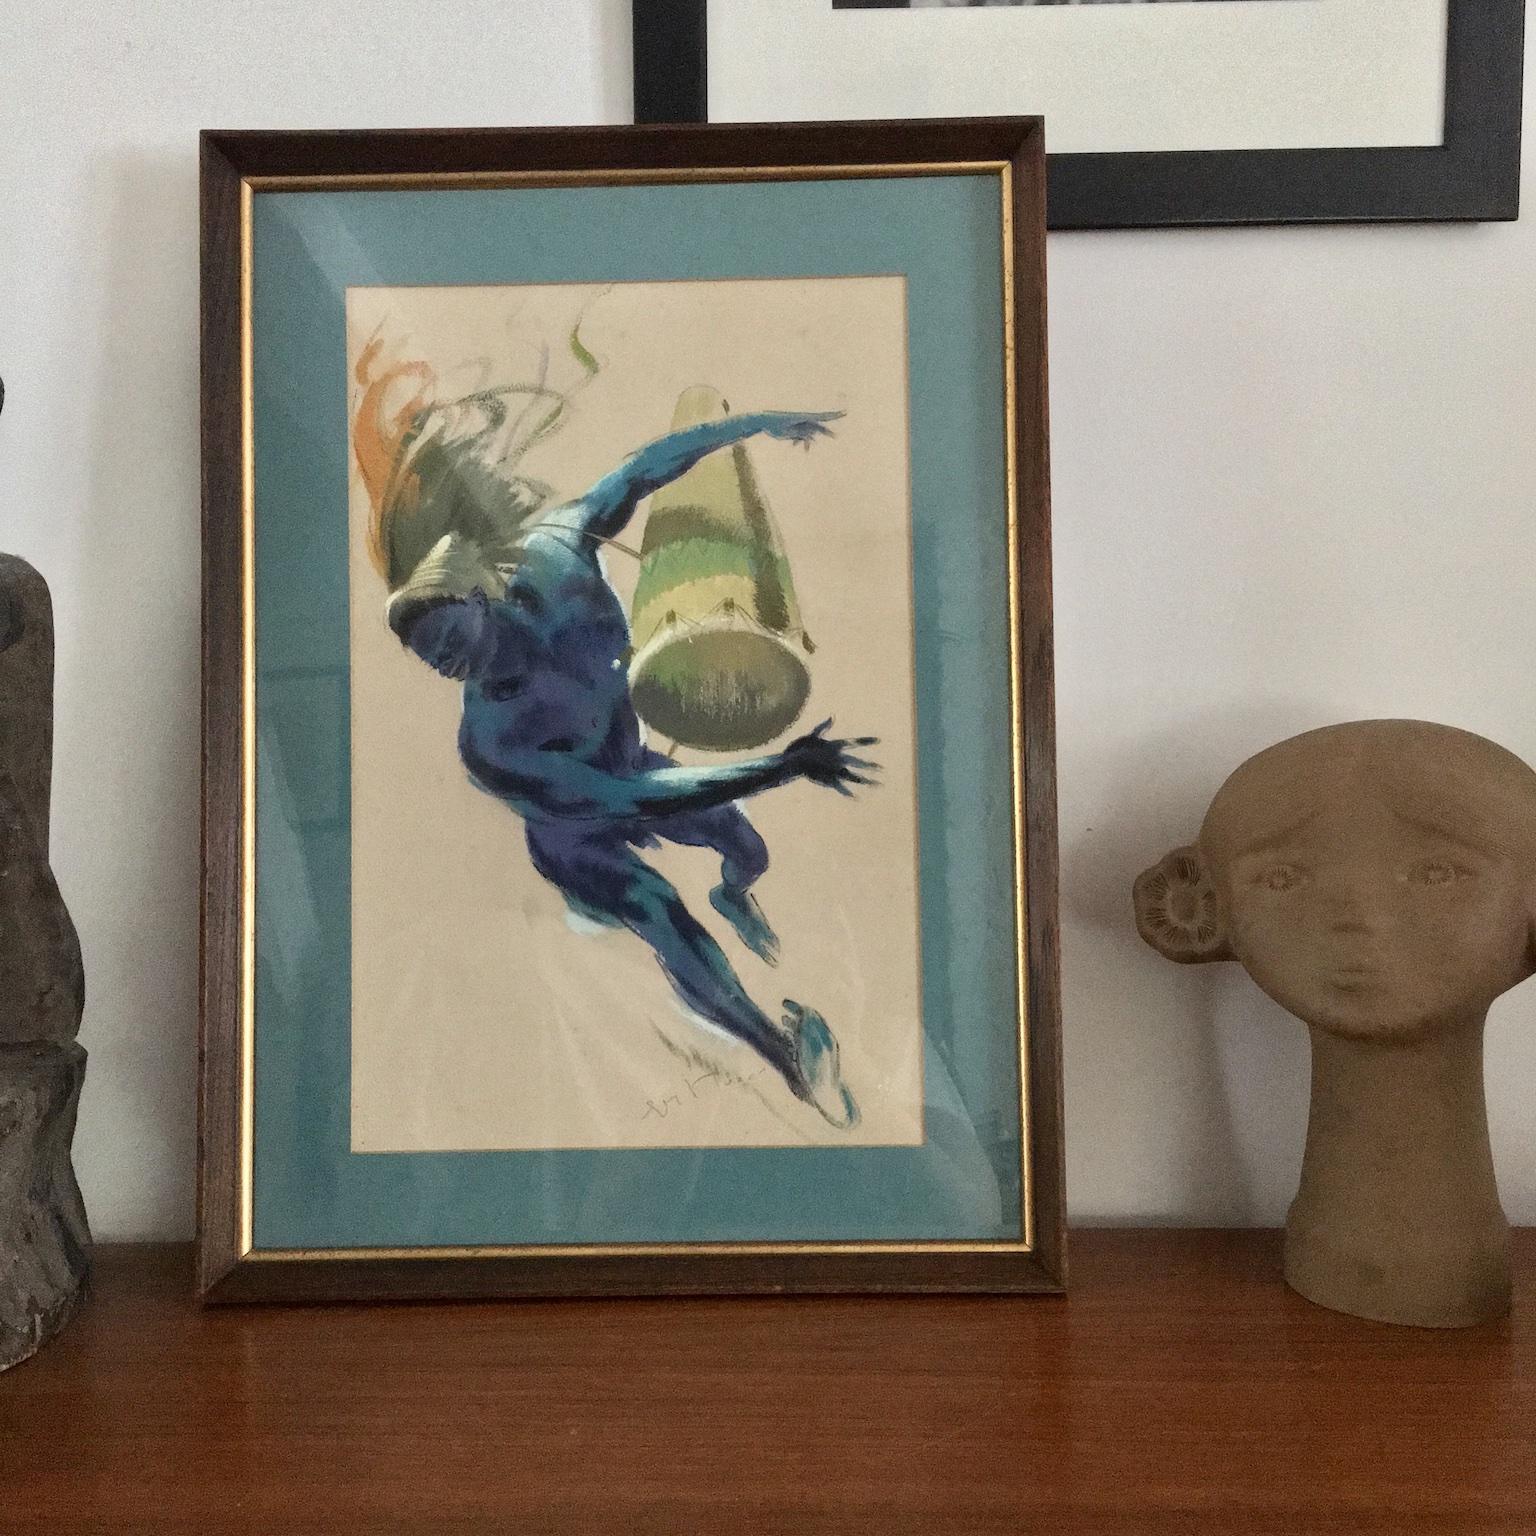 Mid-Century Watercolour Painting of an ‘African Dancer with Drum’ by Guy Huze, 1912-1997

Midcentury watercolour of an ‘African Dancer with drum’ by Guy Huze, circa 1950s. In the original oak frame, with gold inner frame. Beautiful vibrant blue